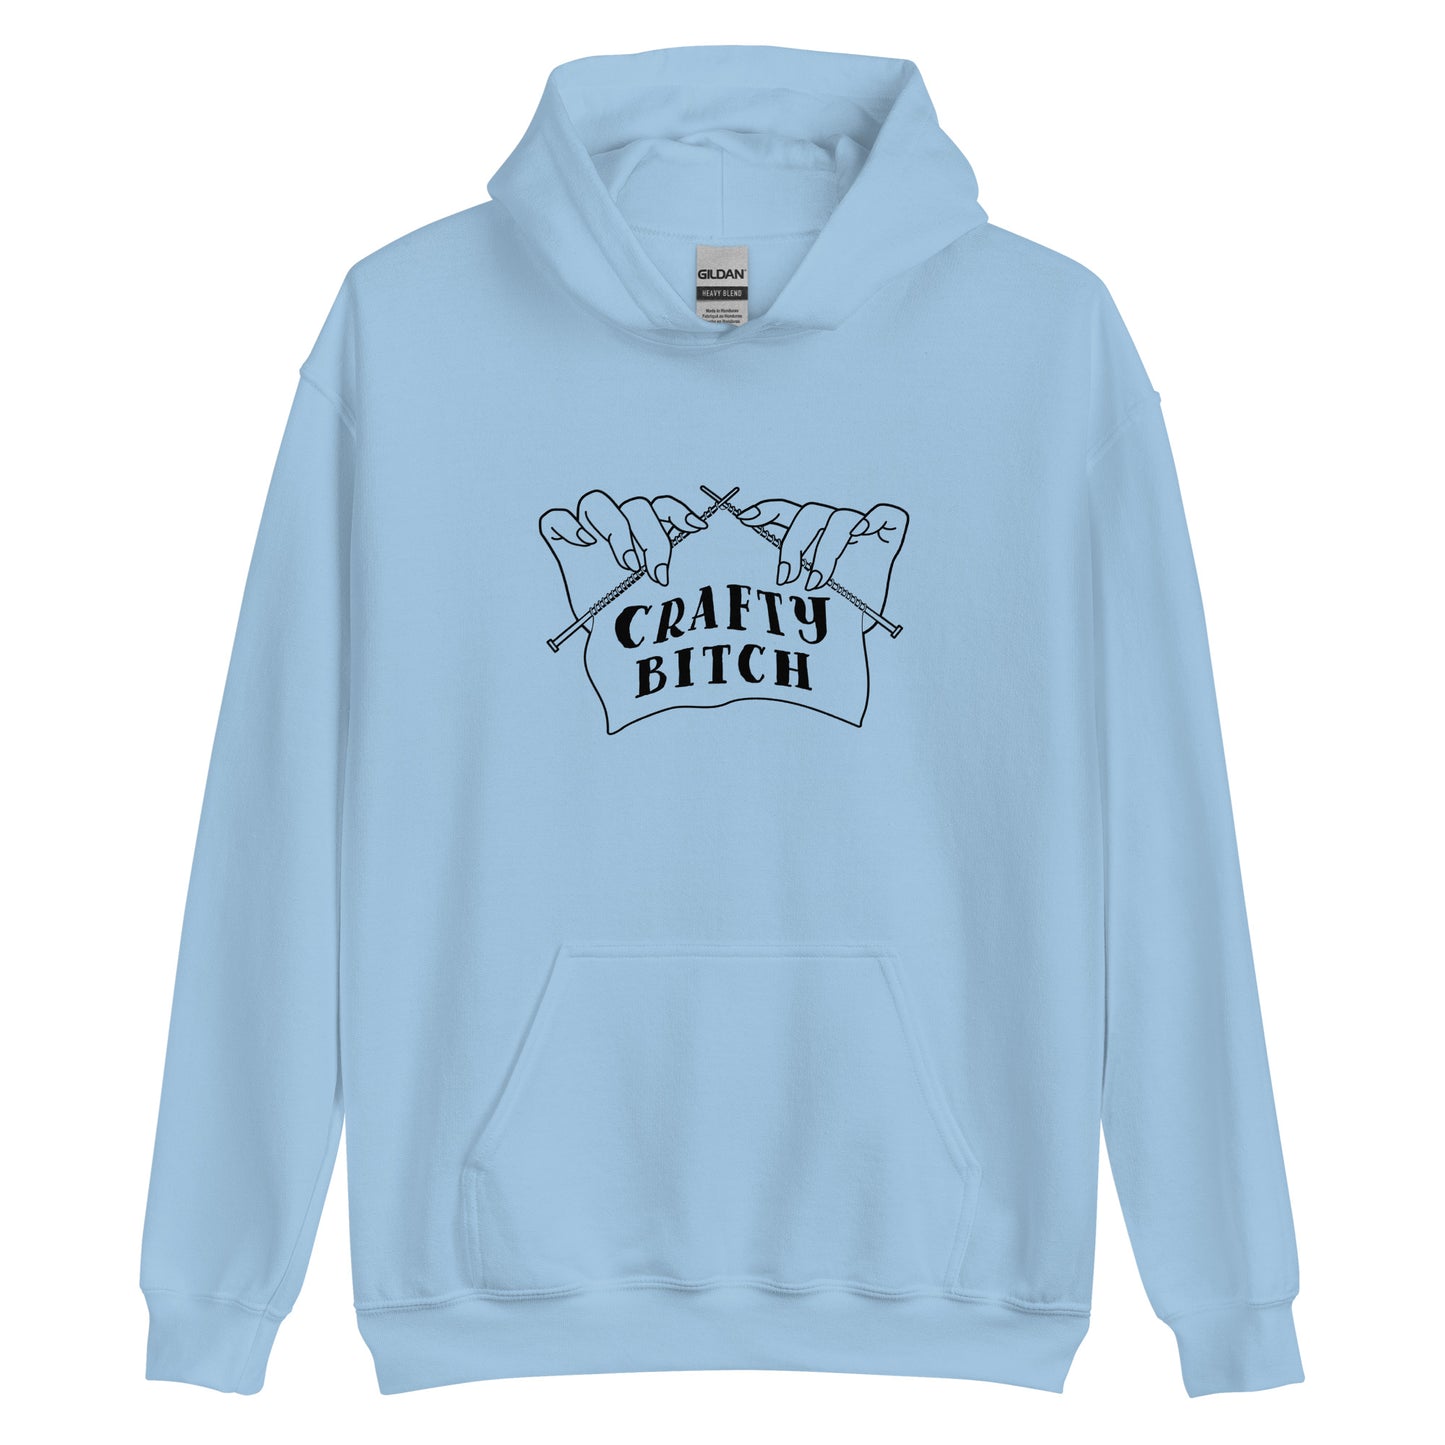 A light blue hooded sweatshirt featuring a single-color illustration of a pair of hands holding knitting needles. Fabric on the needles features text that reads "crafty bitch".